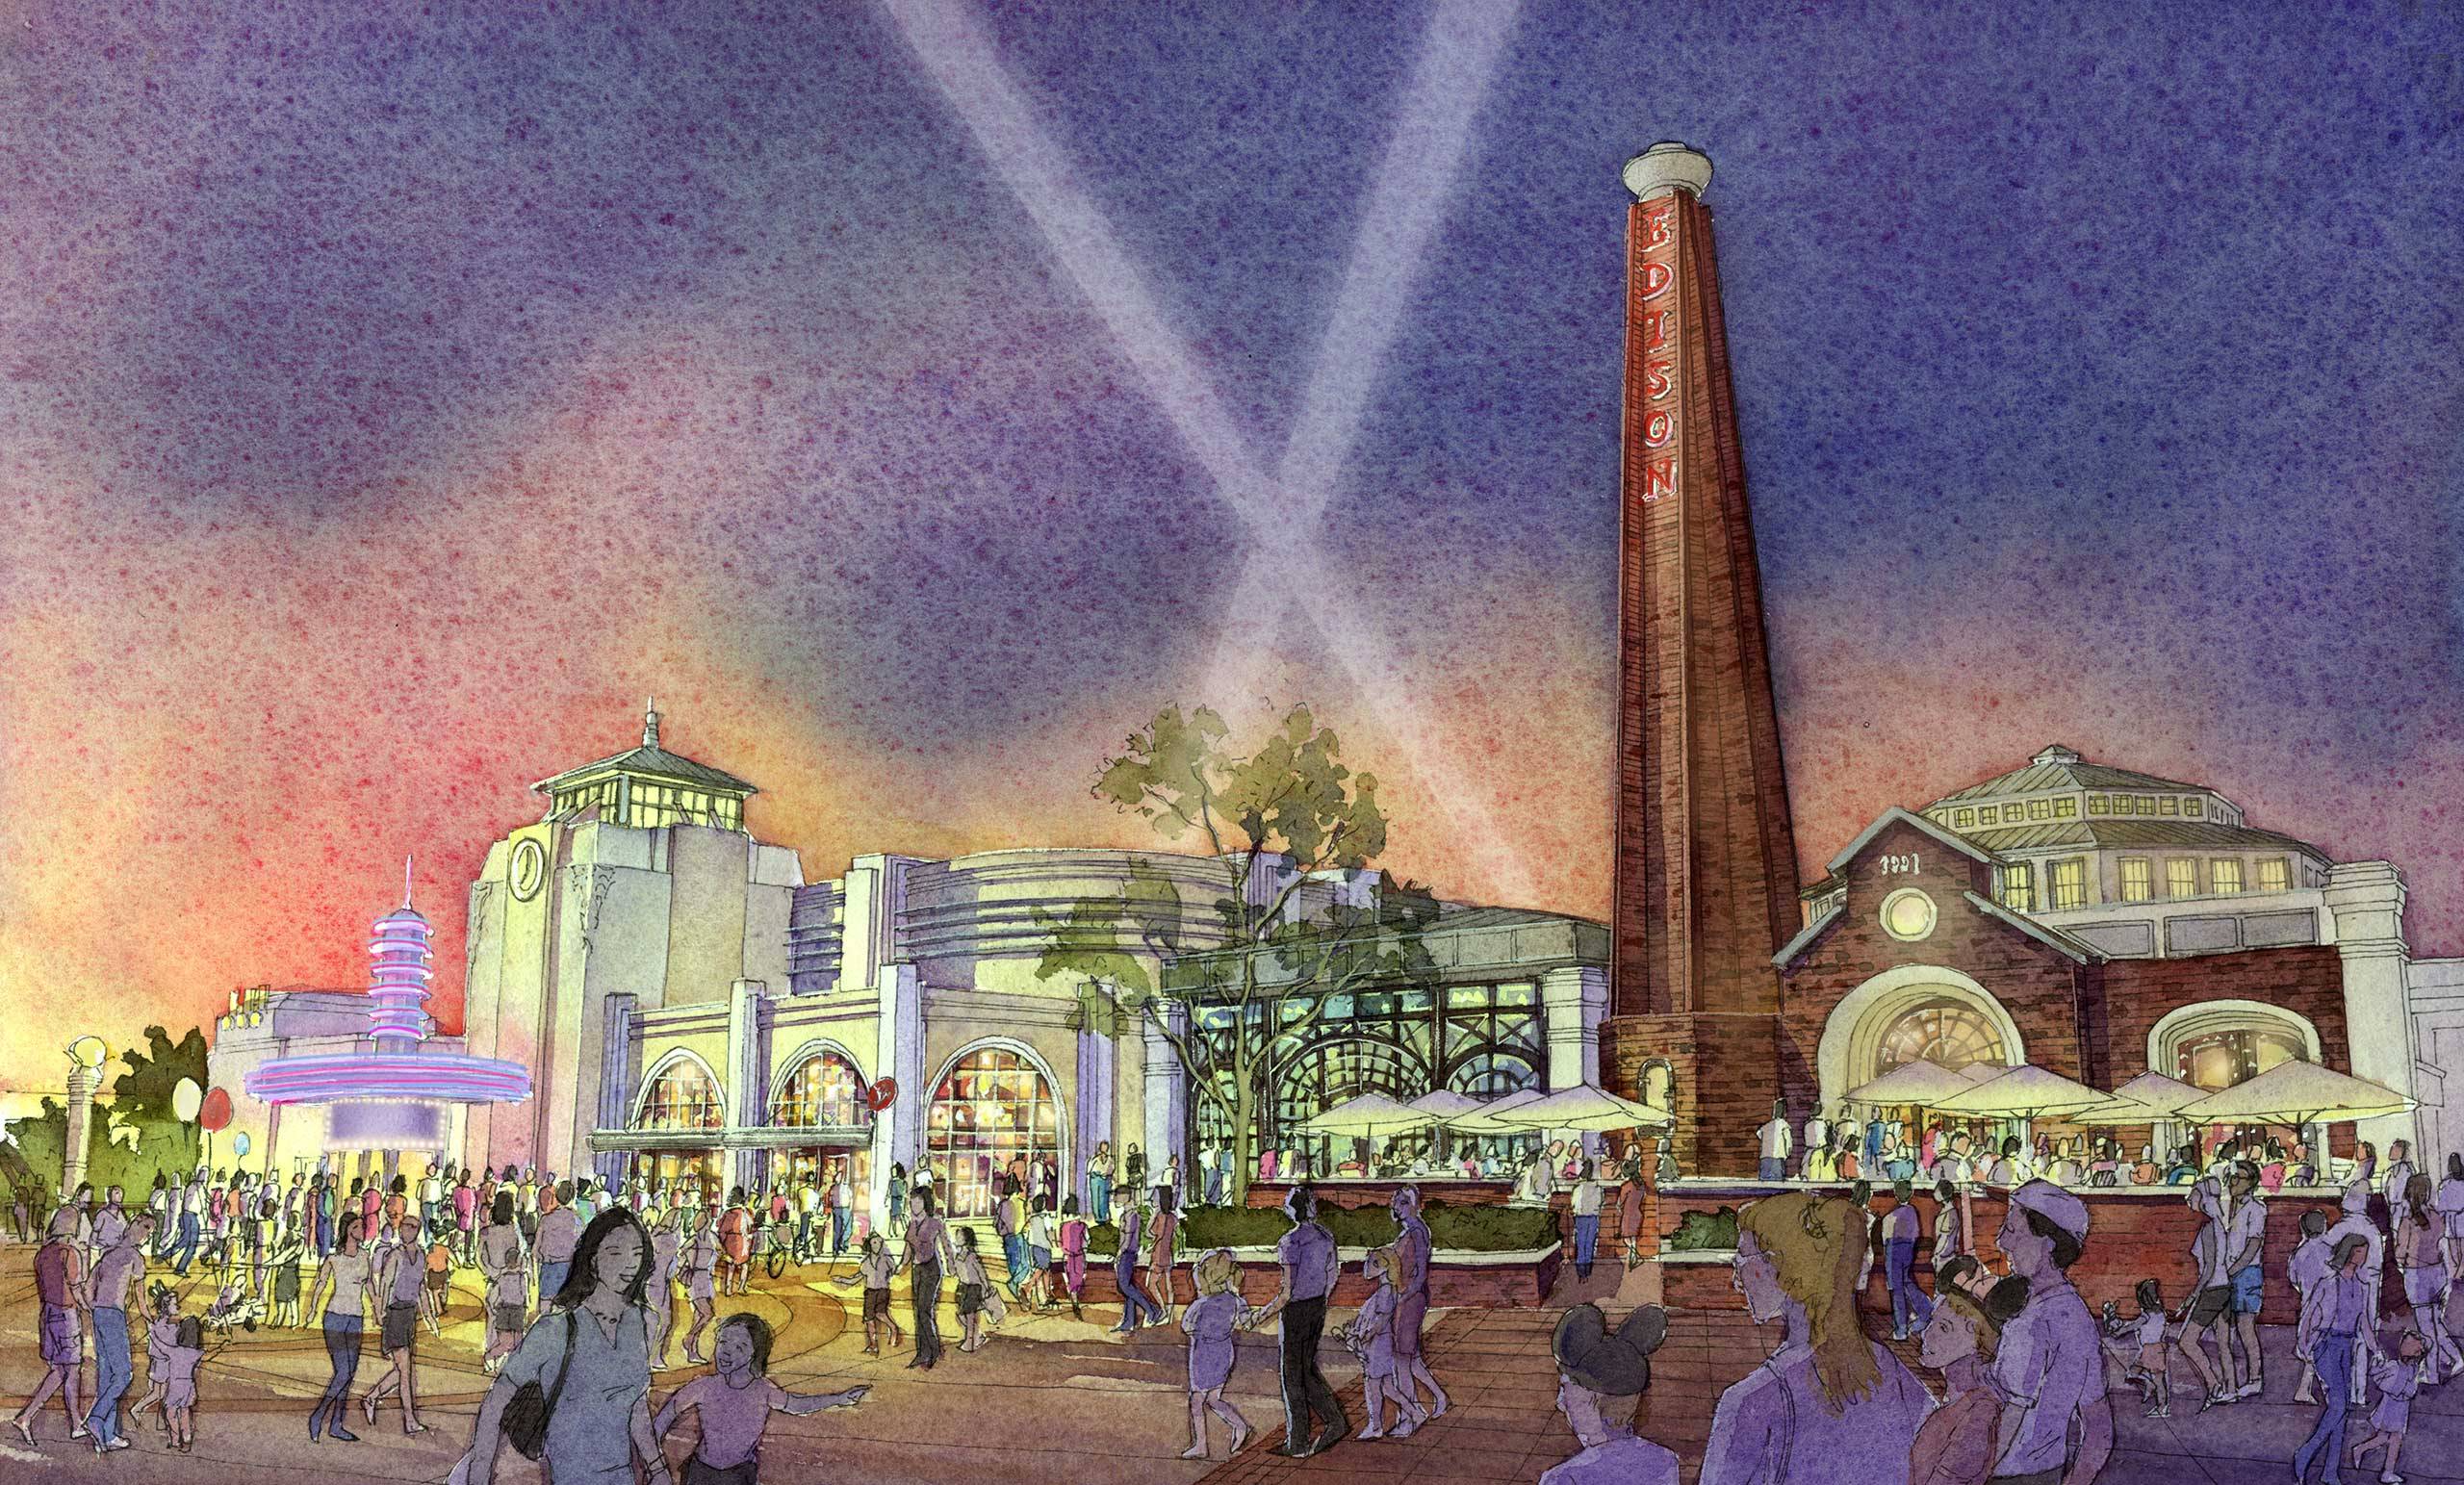 The Edison to bring a lavish 'Industrial Gothic' style restaurant, bar and nighttime destination to Disney Springs in 2016